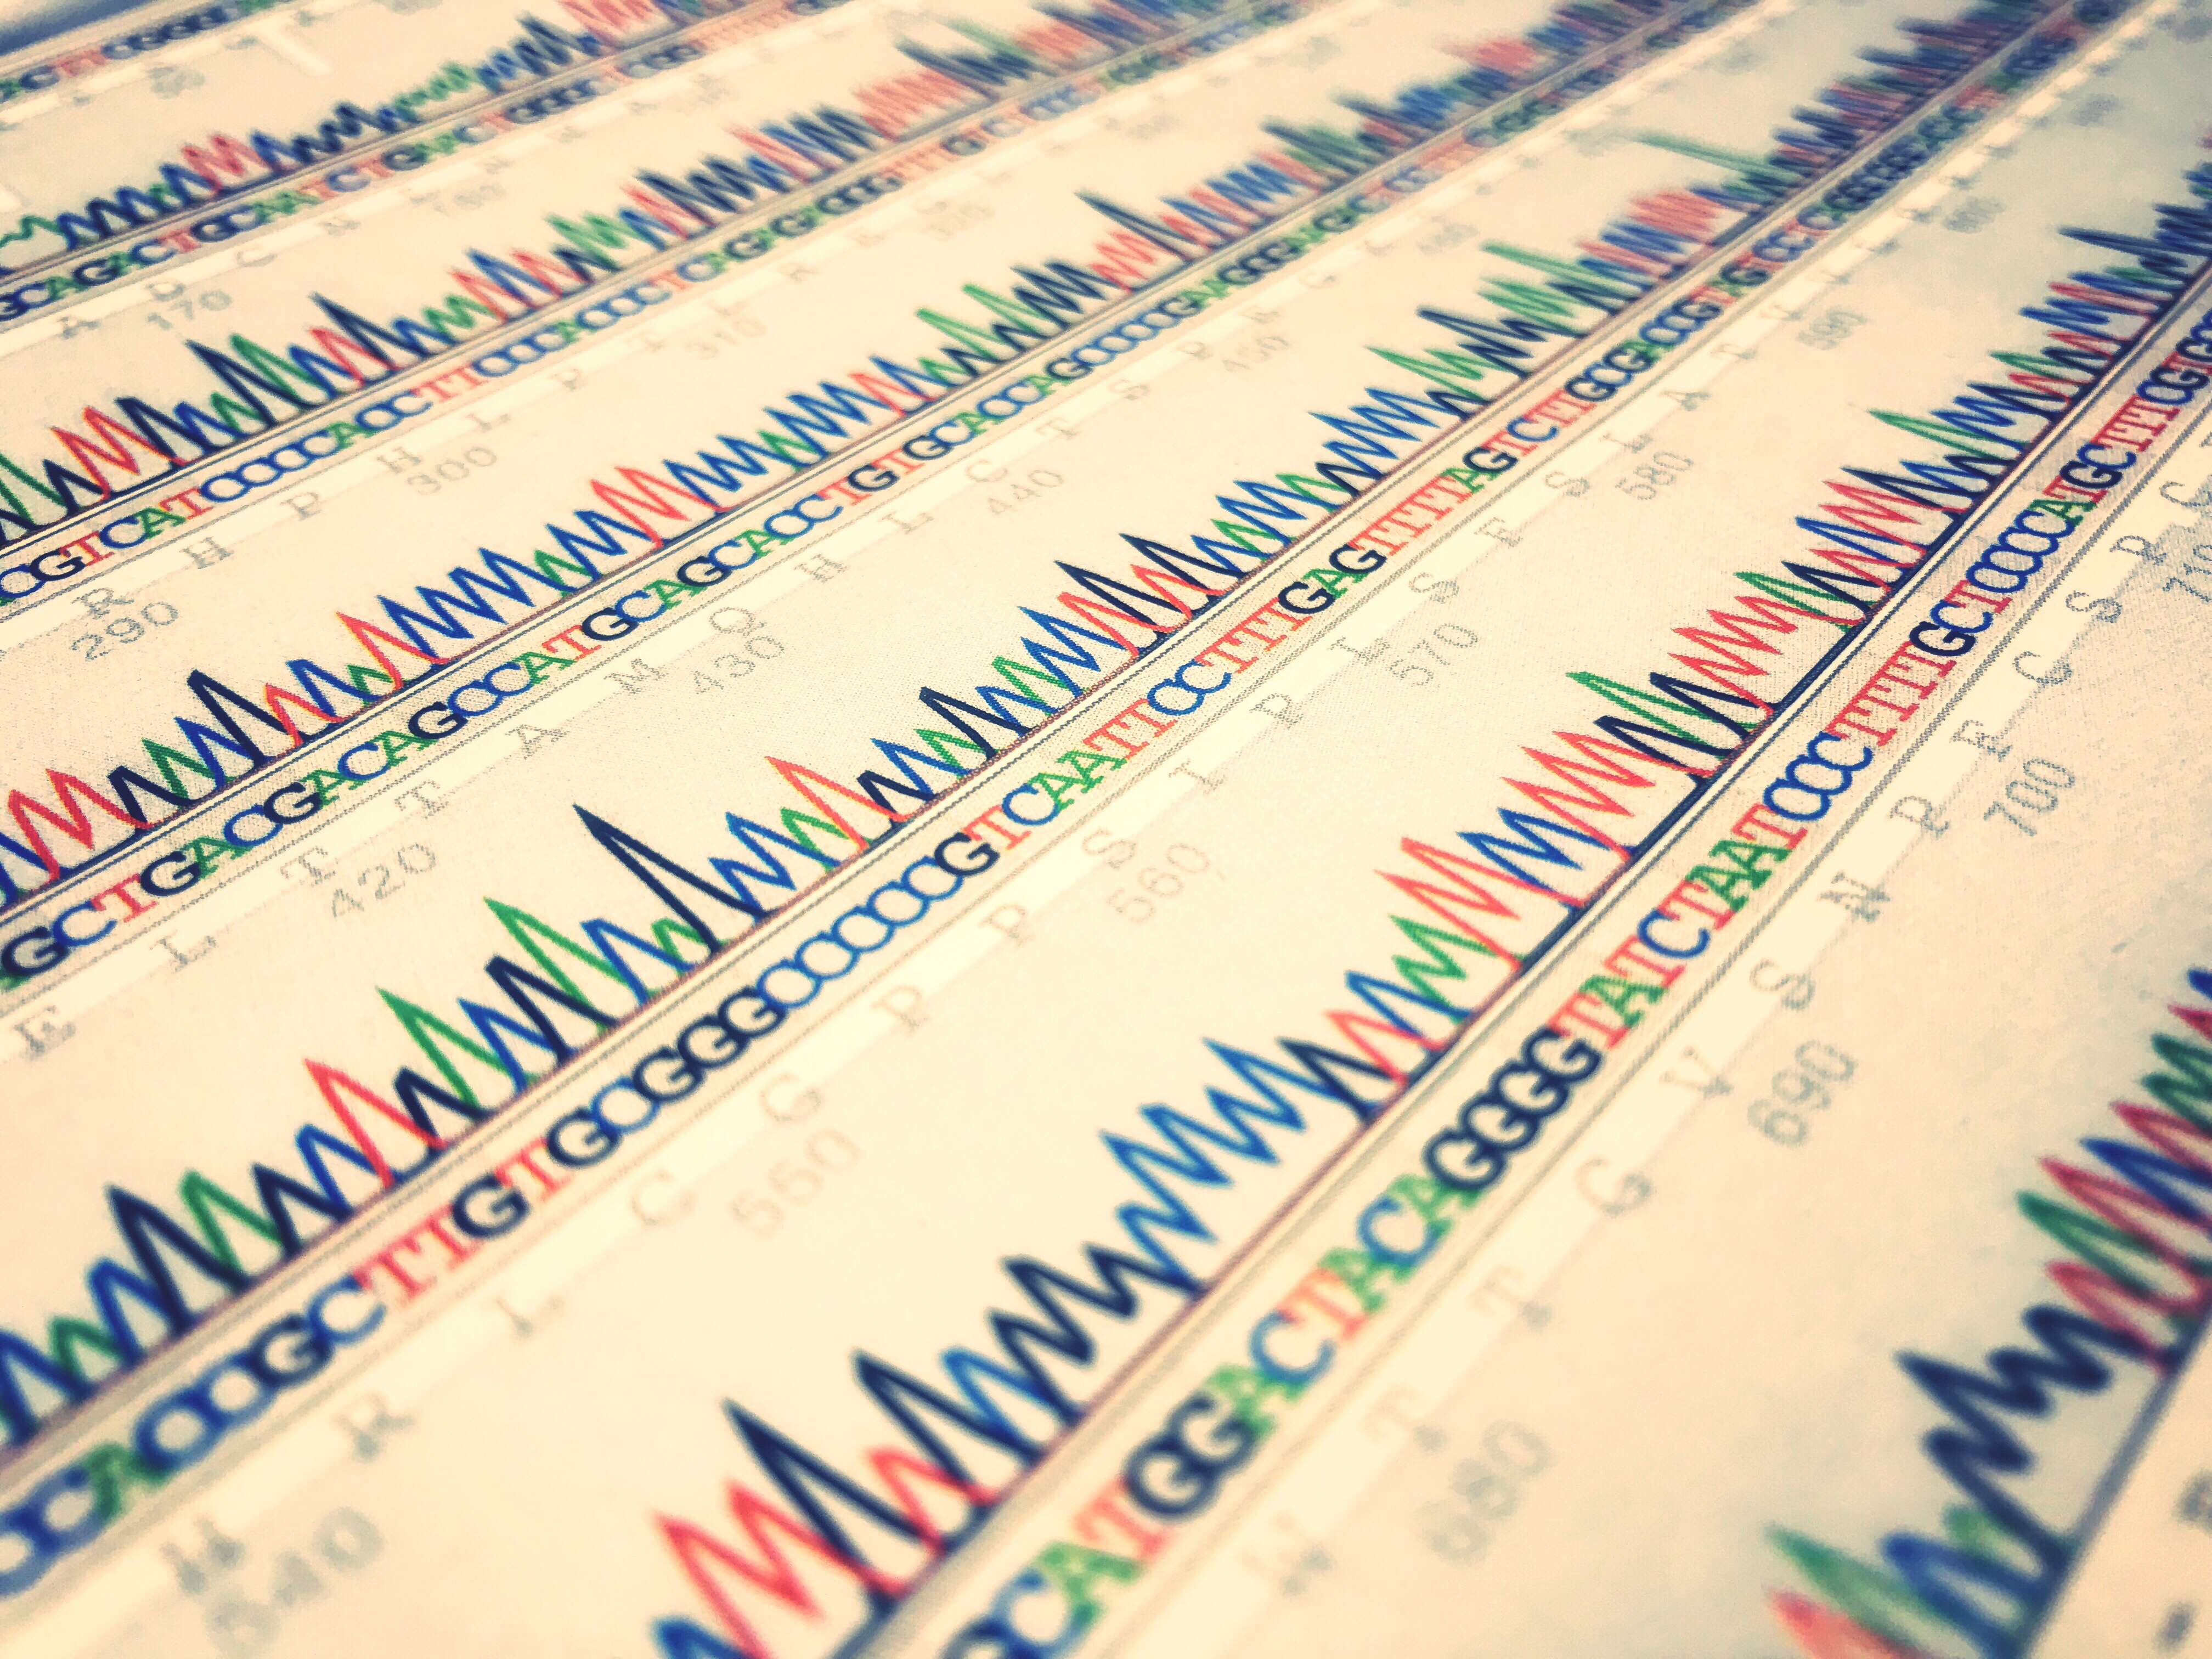 Data sheet of DNA sequences (Source: envato elements)